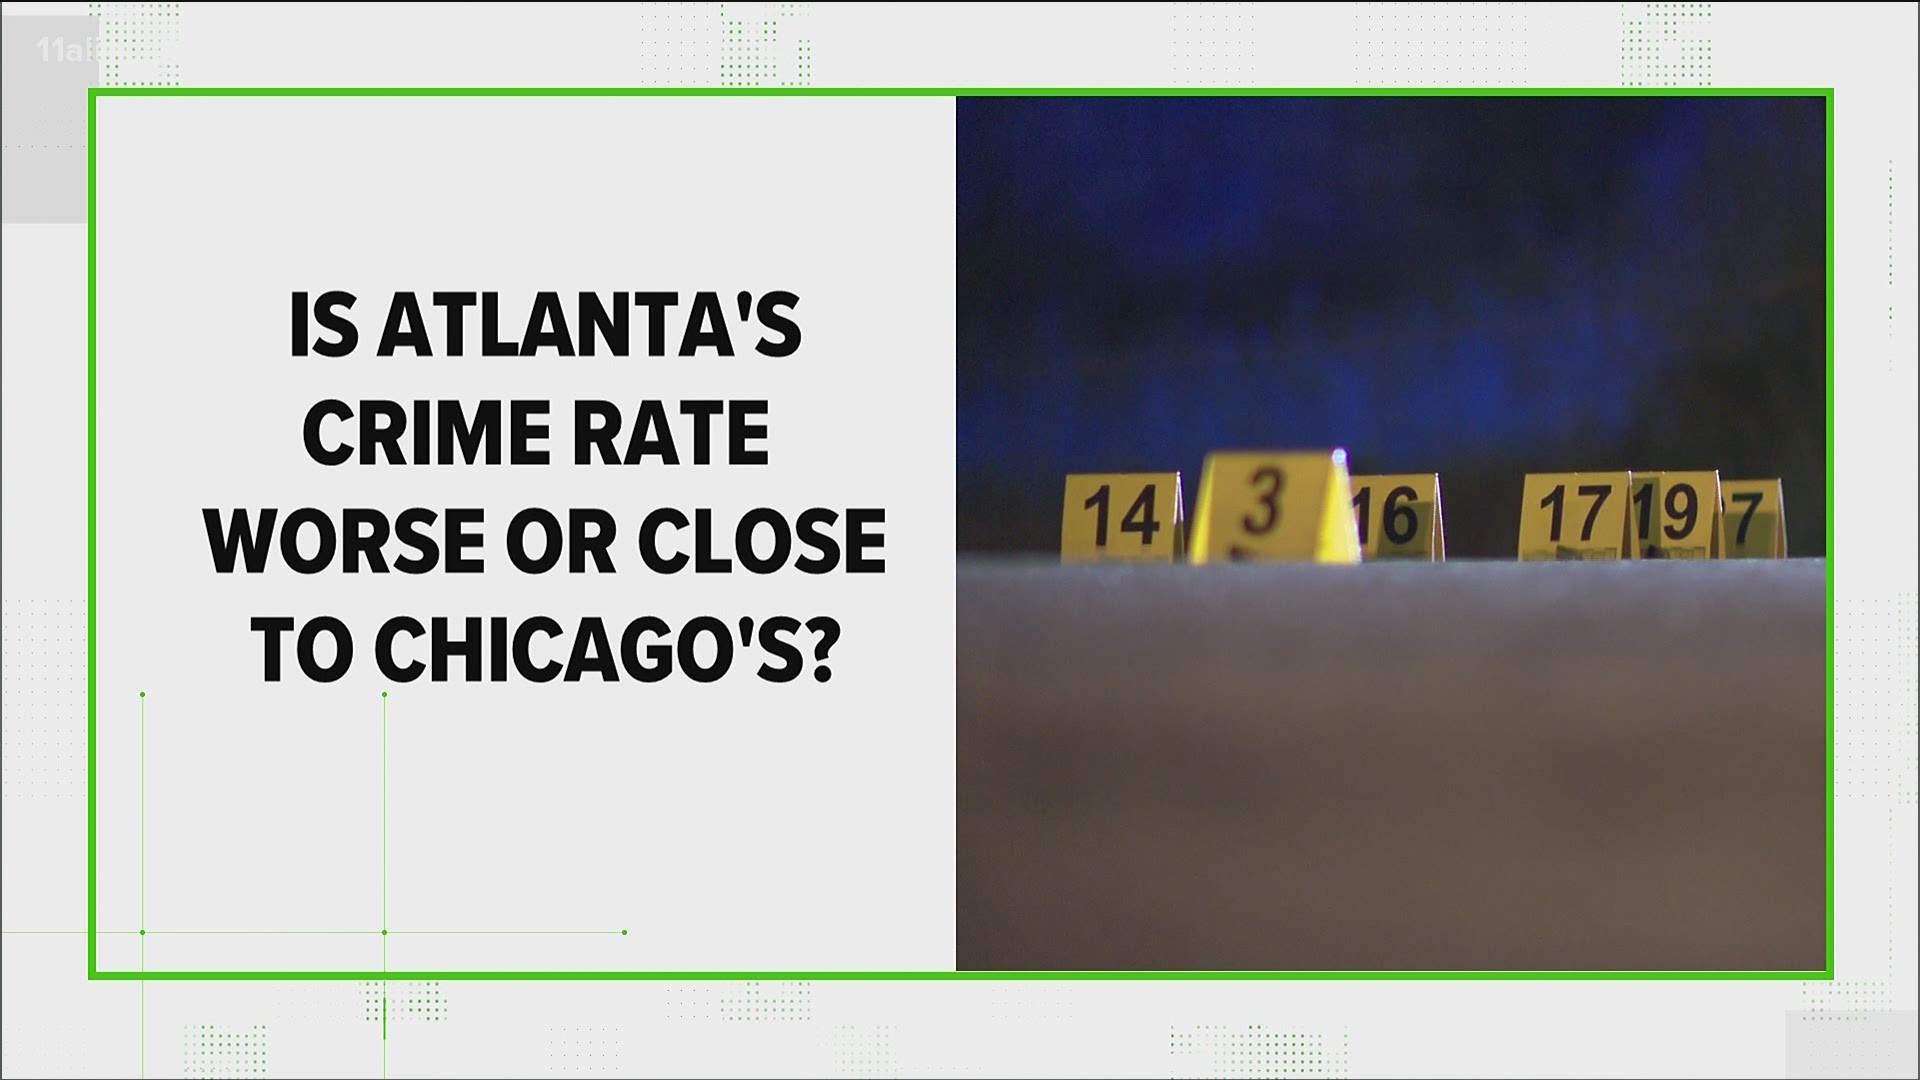 We crunched the numbers and found that even though Chicago is a larger city with more crime, per capita, the likelihood of being a victim is often higher in Atlanta.